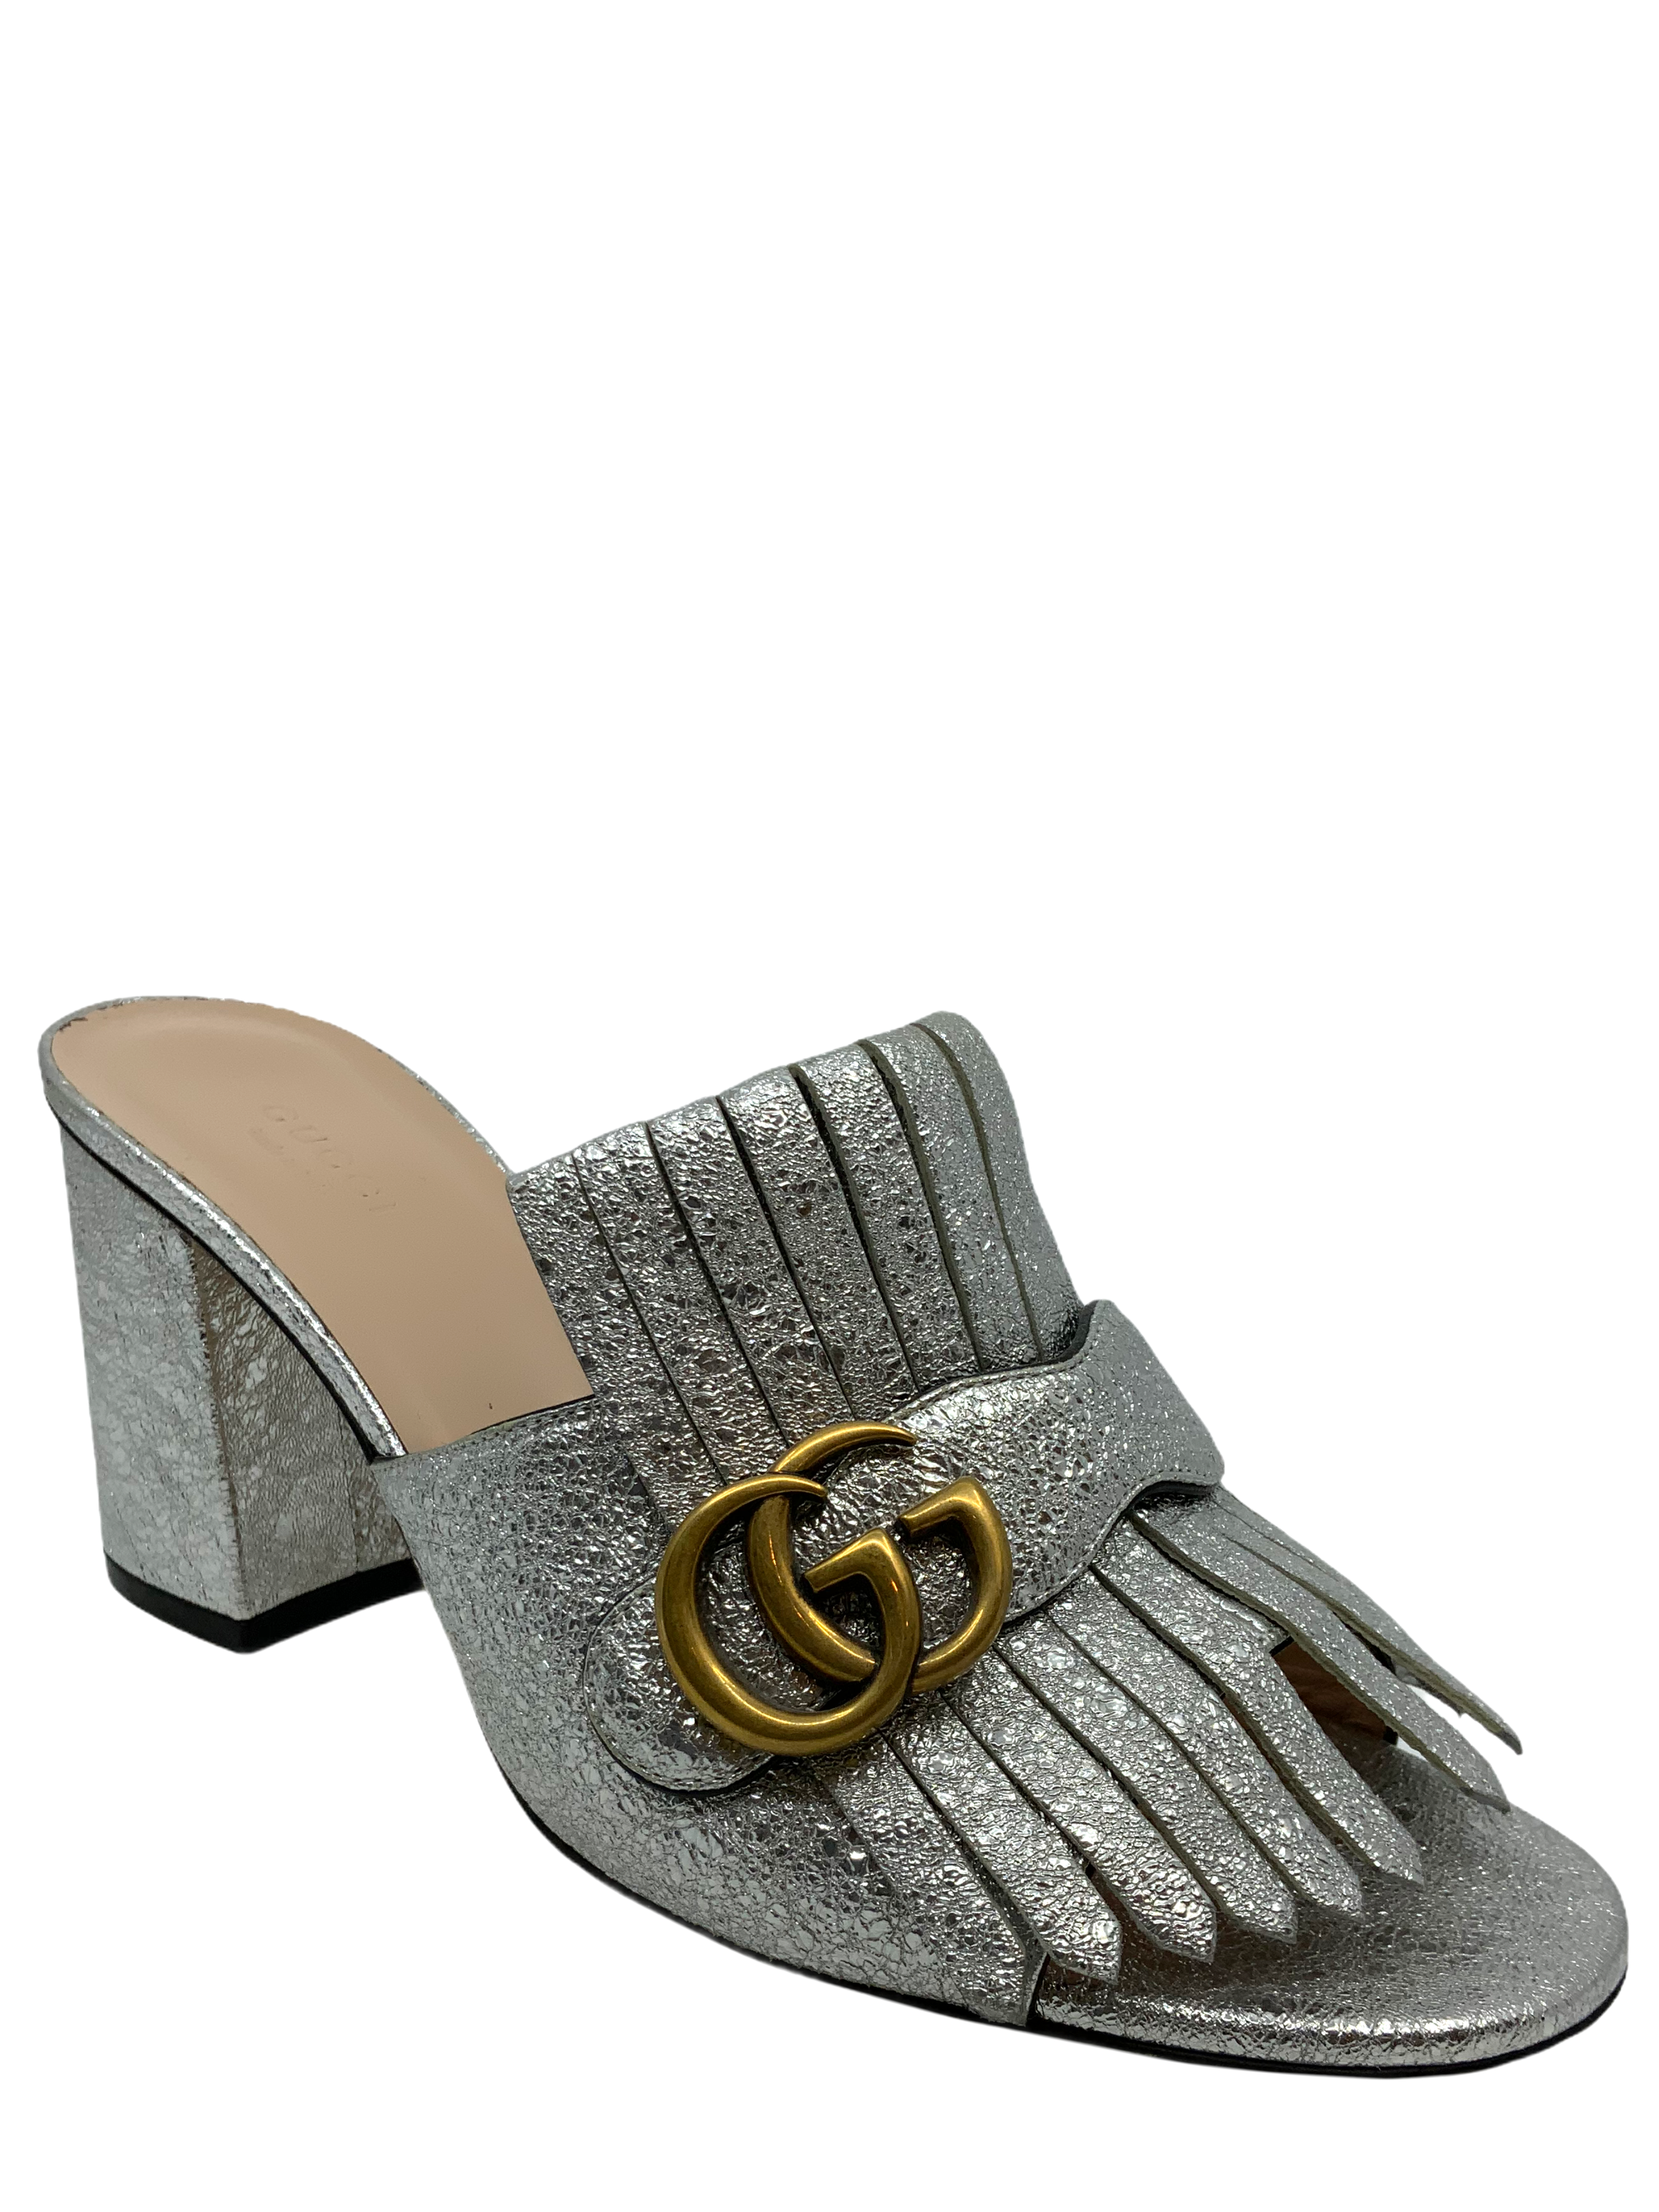 Gucci Marmont Fringed Loafer Heel in Metallic